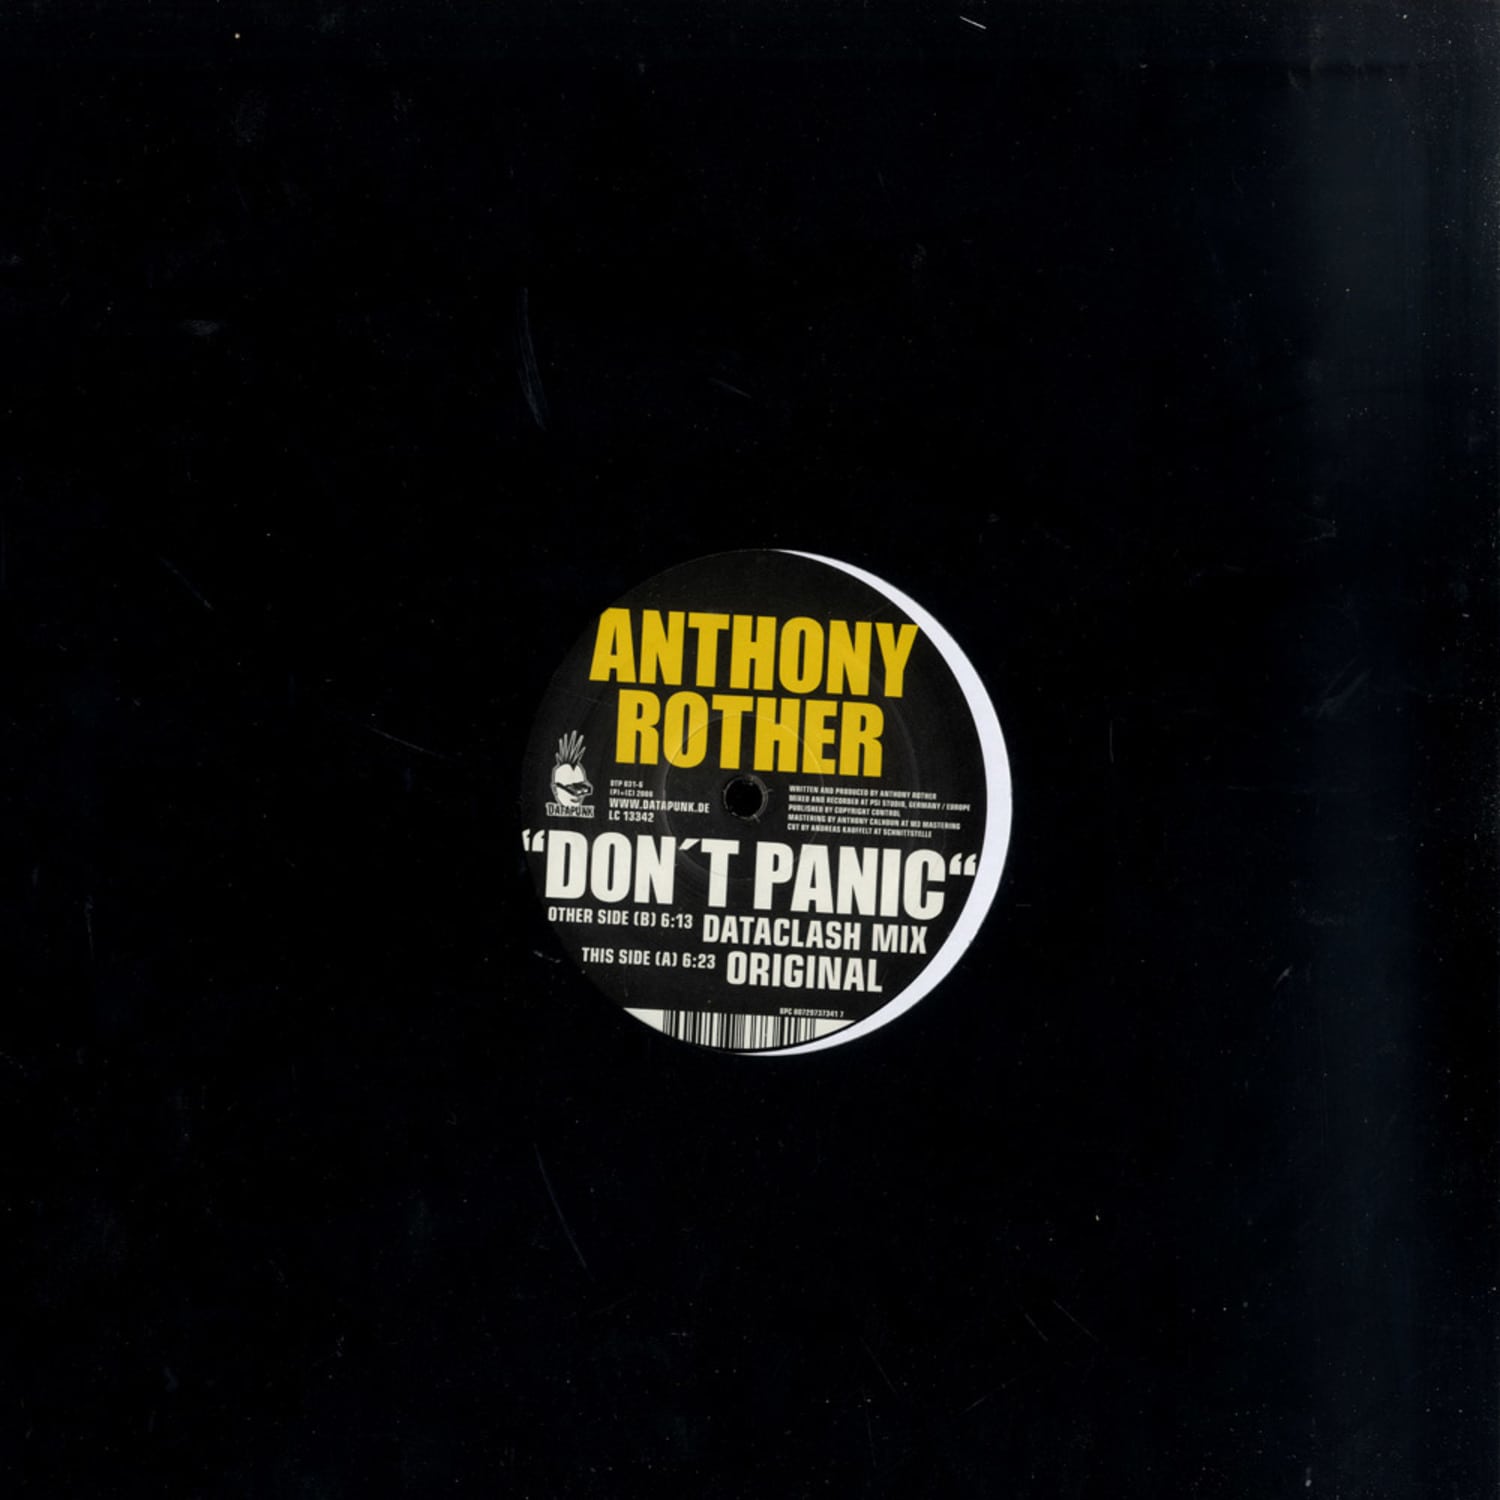 Anthony Rother - DONT PANIC